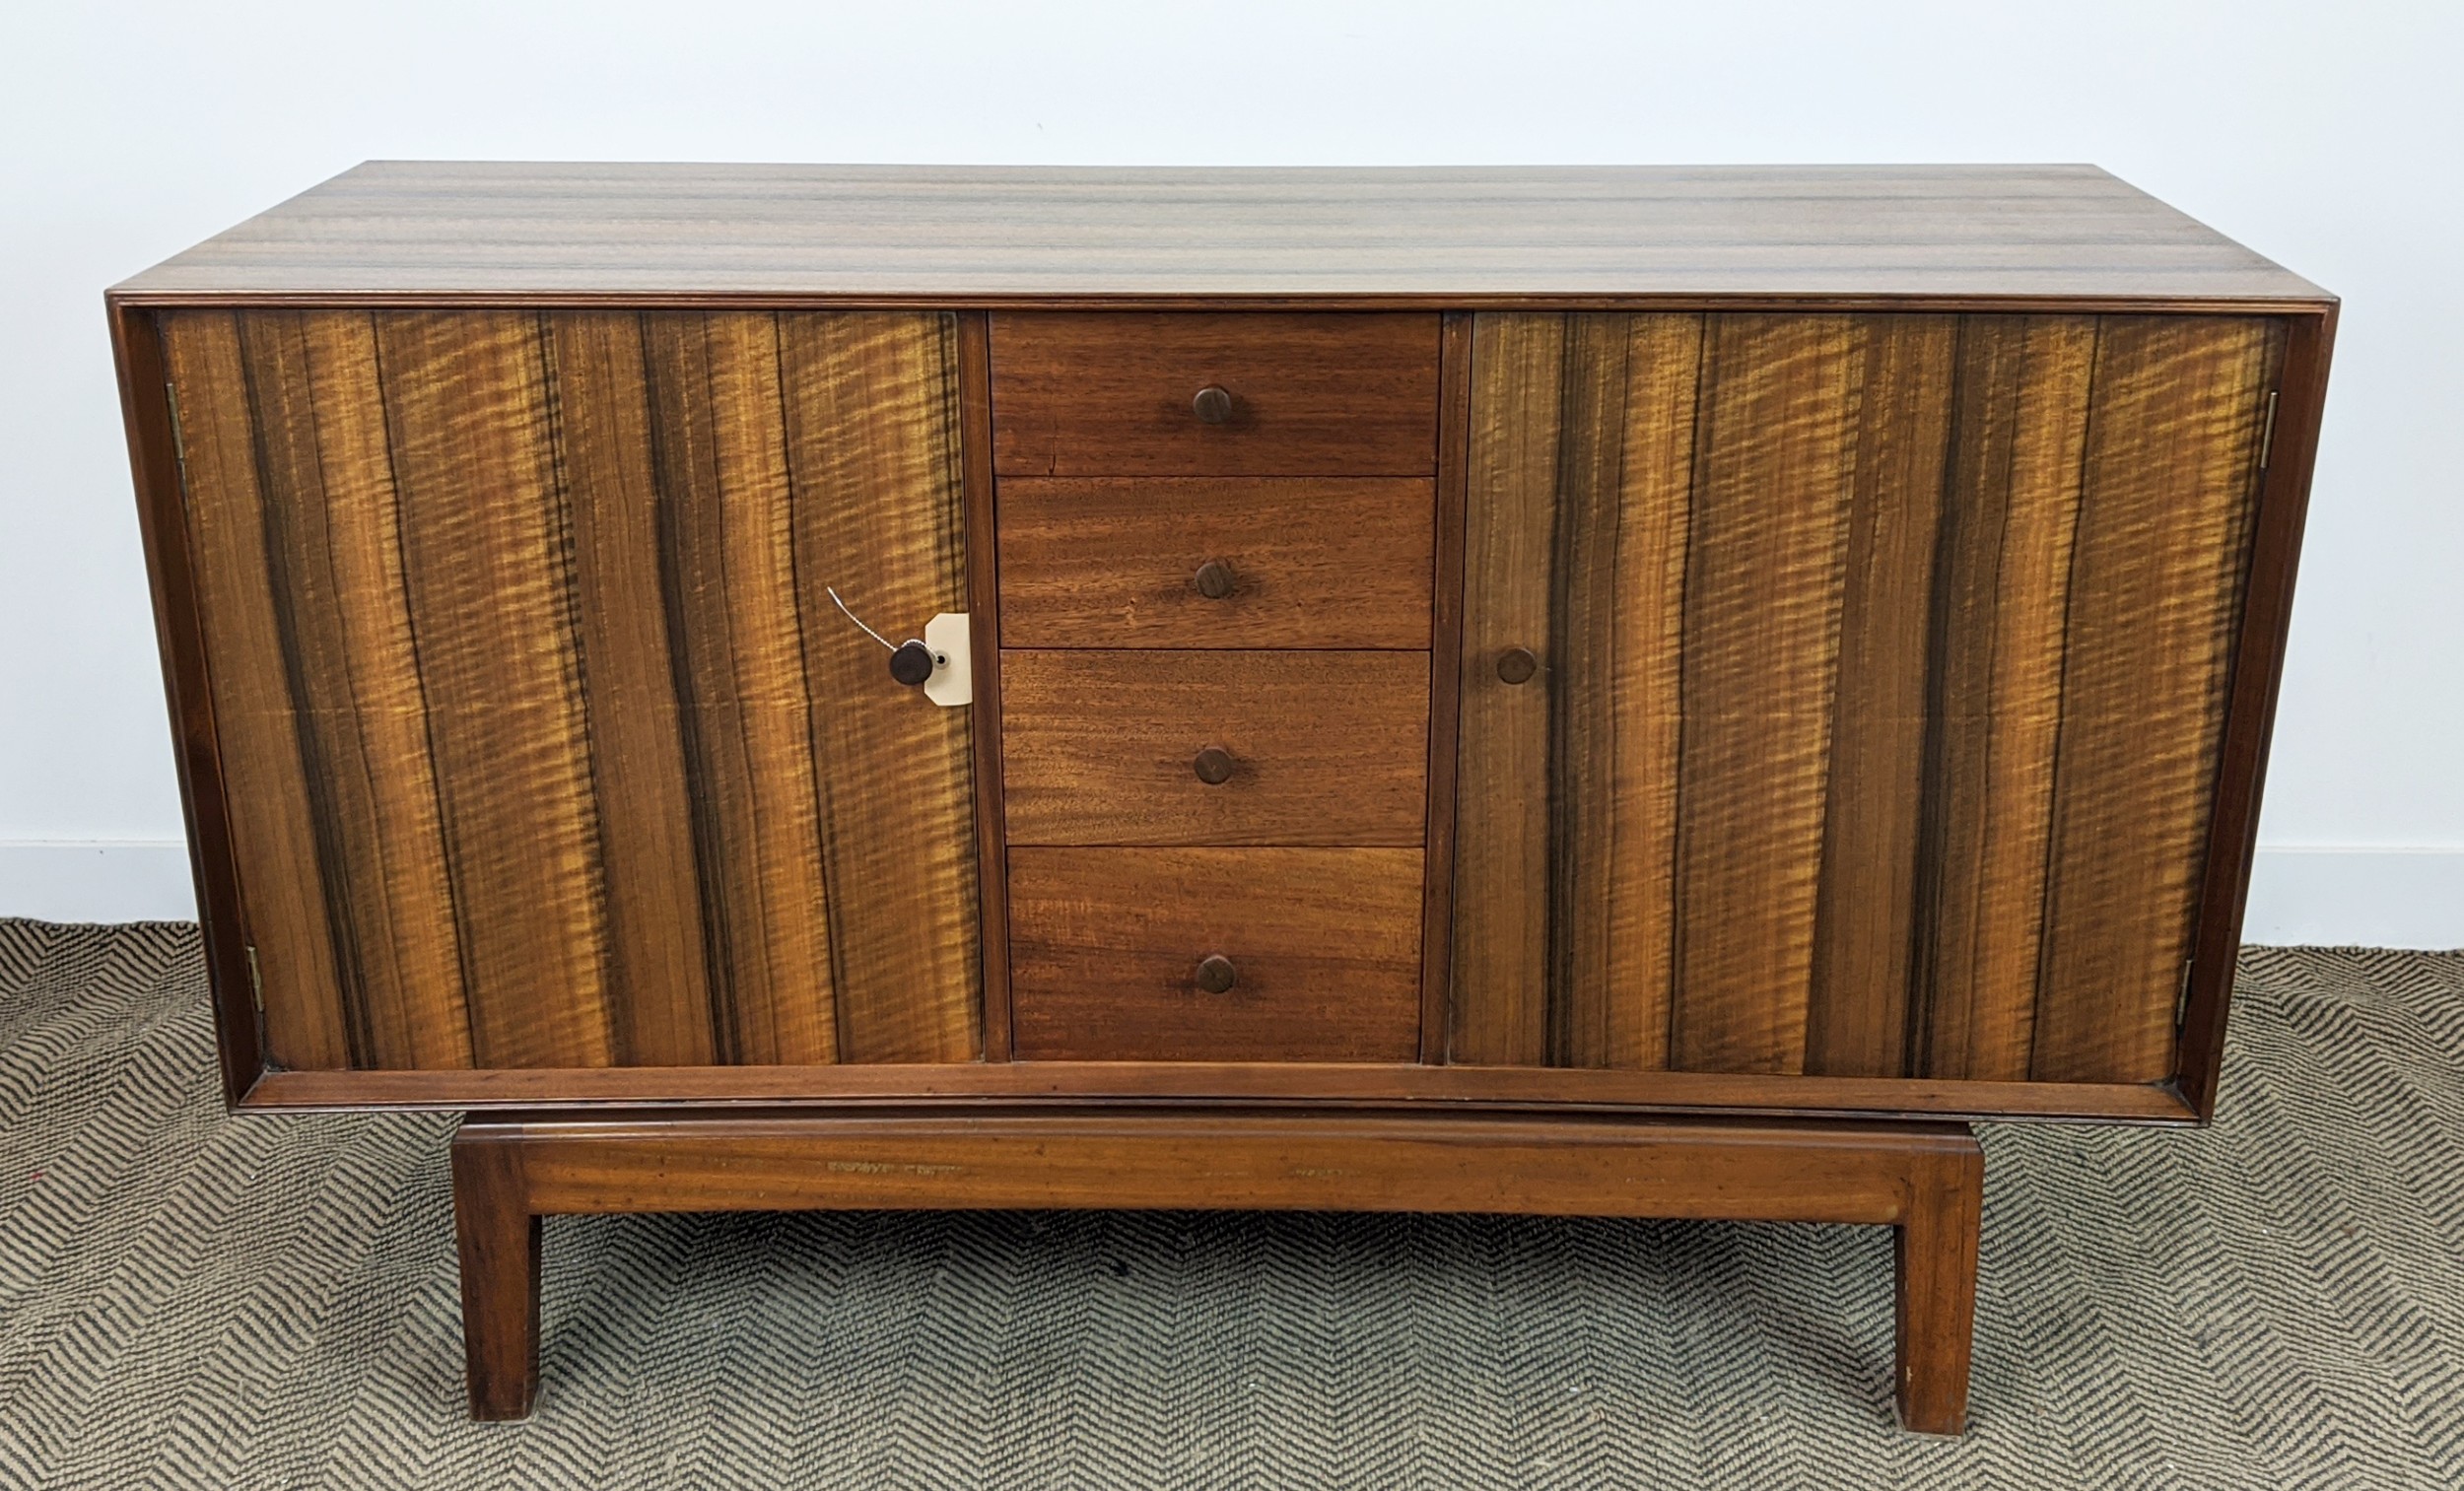 HEAL'S SIDEBOARD, mid 20th century walnut with four drawers flanked by two doors, 90cm H x 145cm x